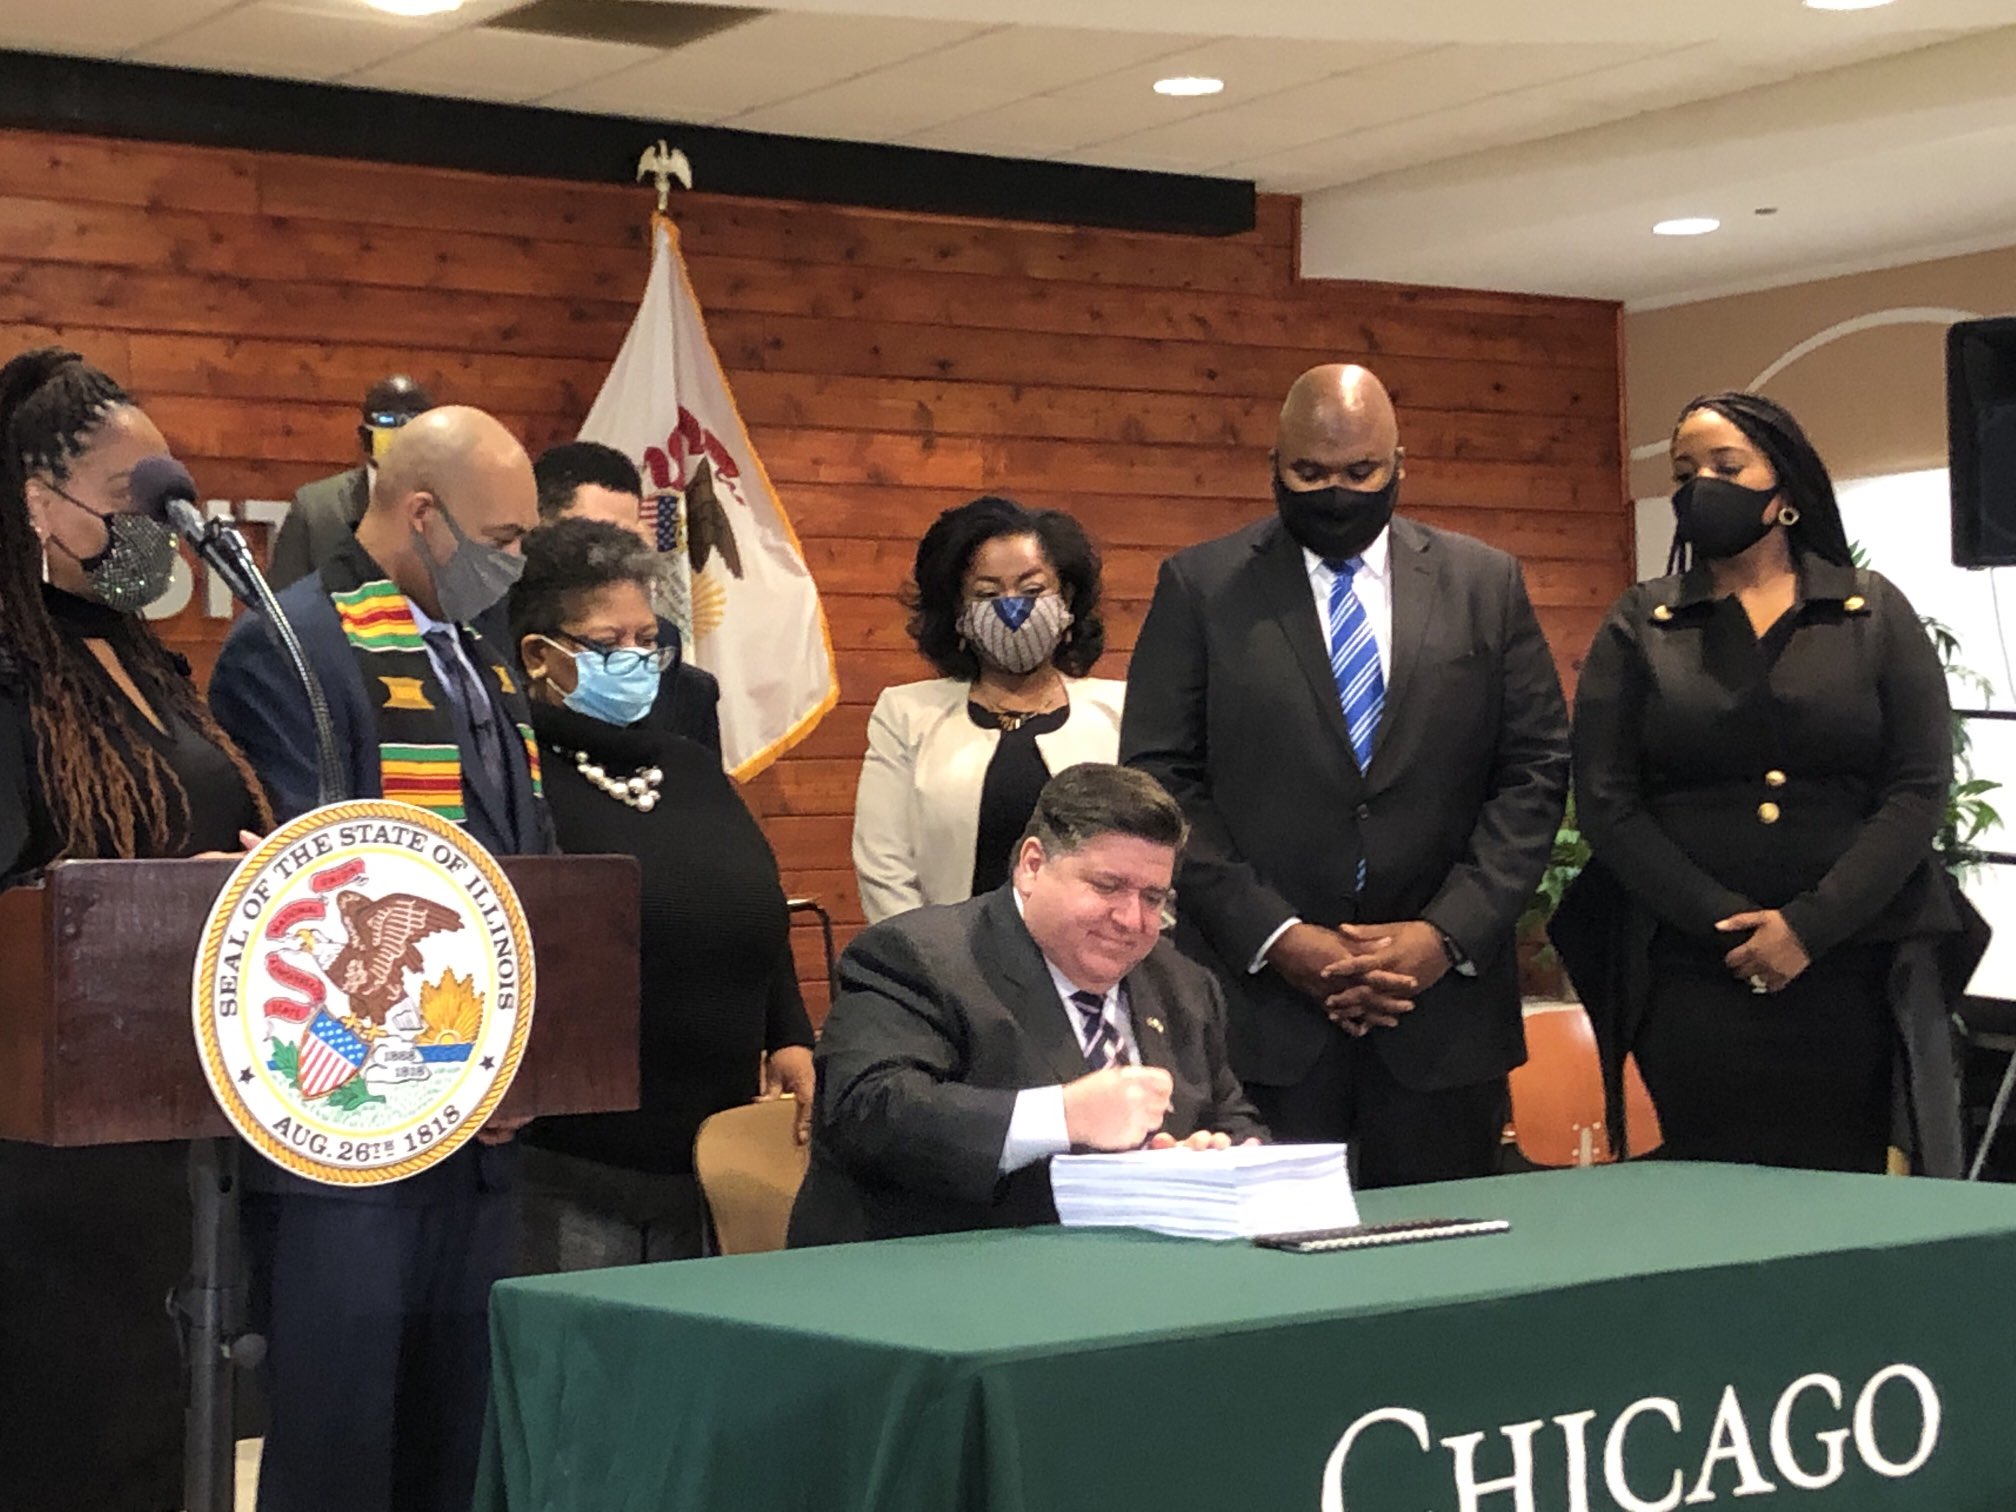 Gov. J.B. Pritzker signs criminal justice reform package sitting at a green table surrounded by lawmakers in suits and face masks..